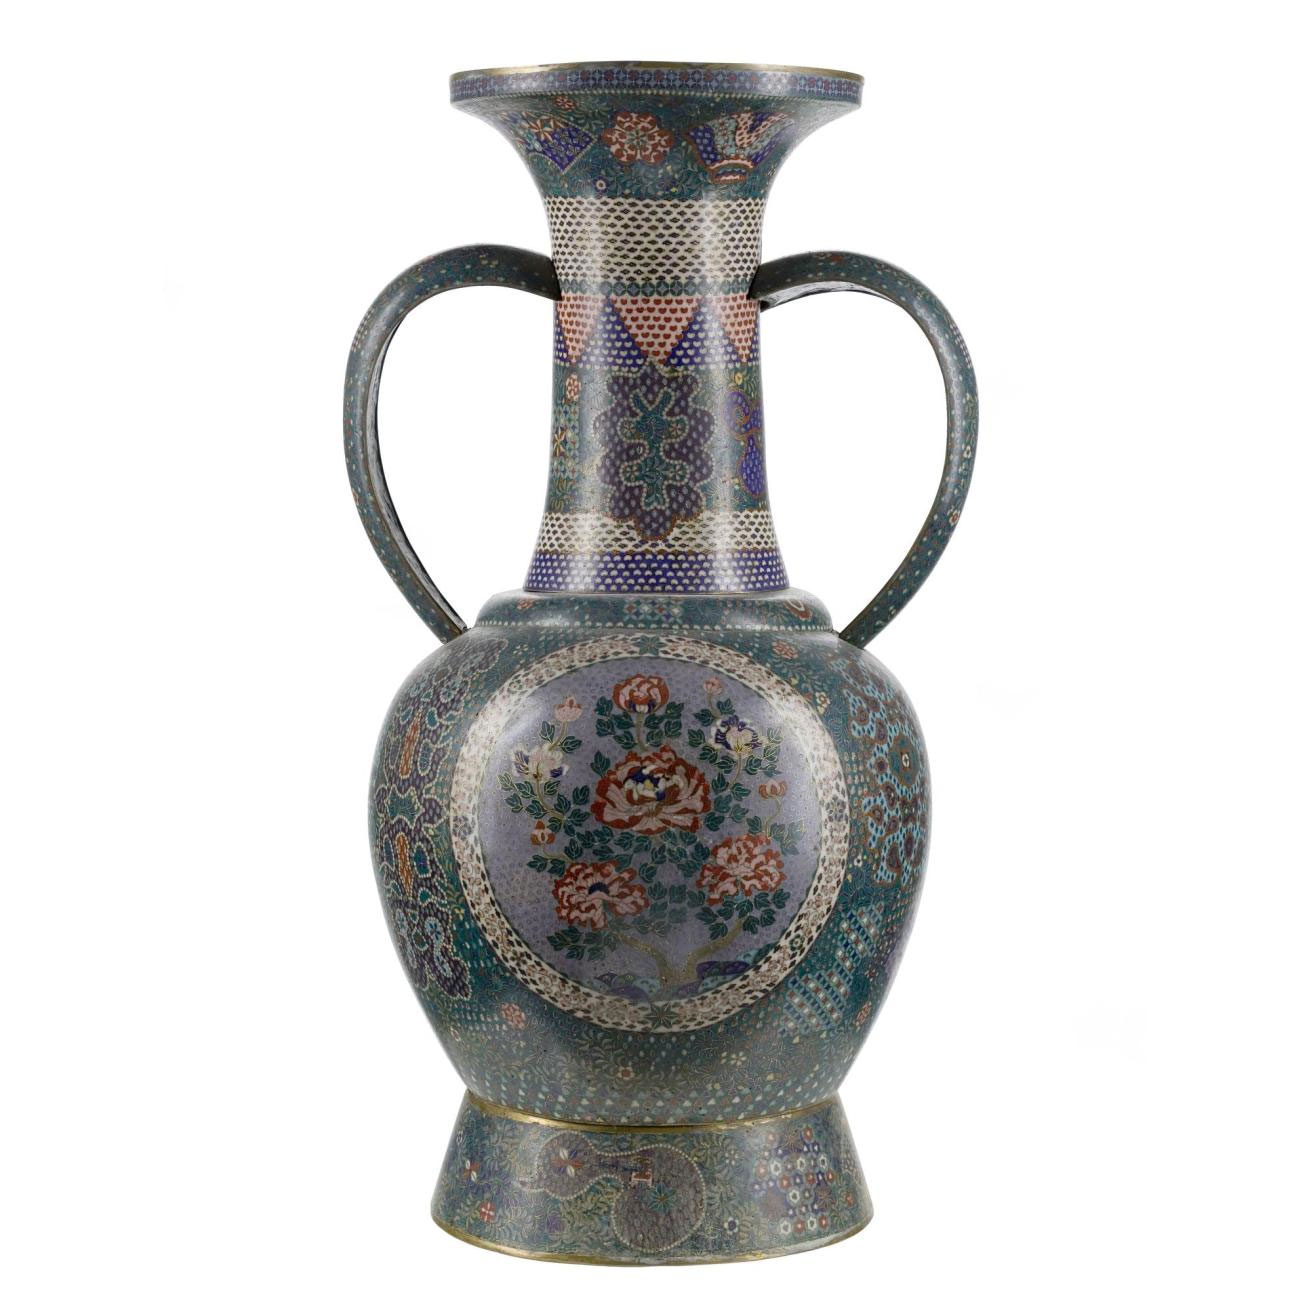 Vase of cloisonne enamel, decorated with medallions containing flowers: Japan, 1850-1870.